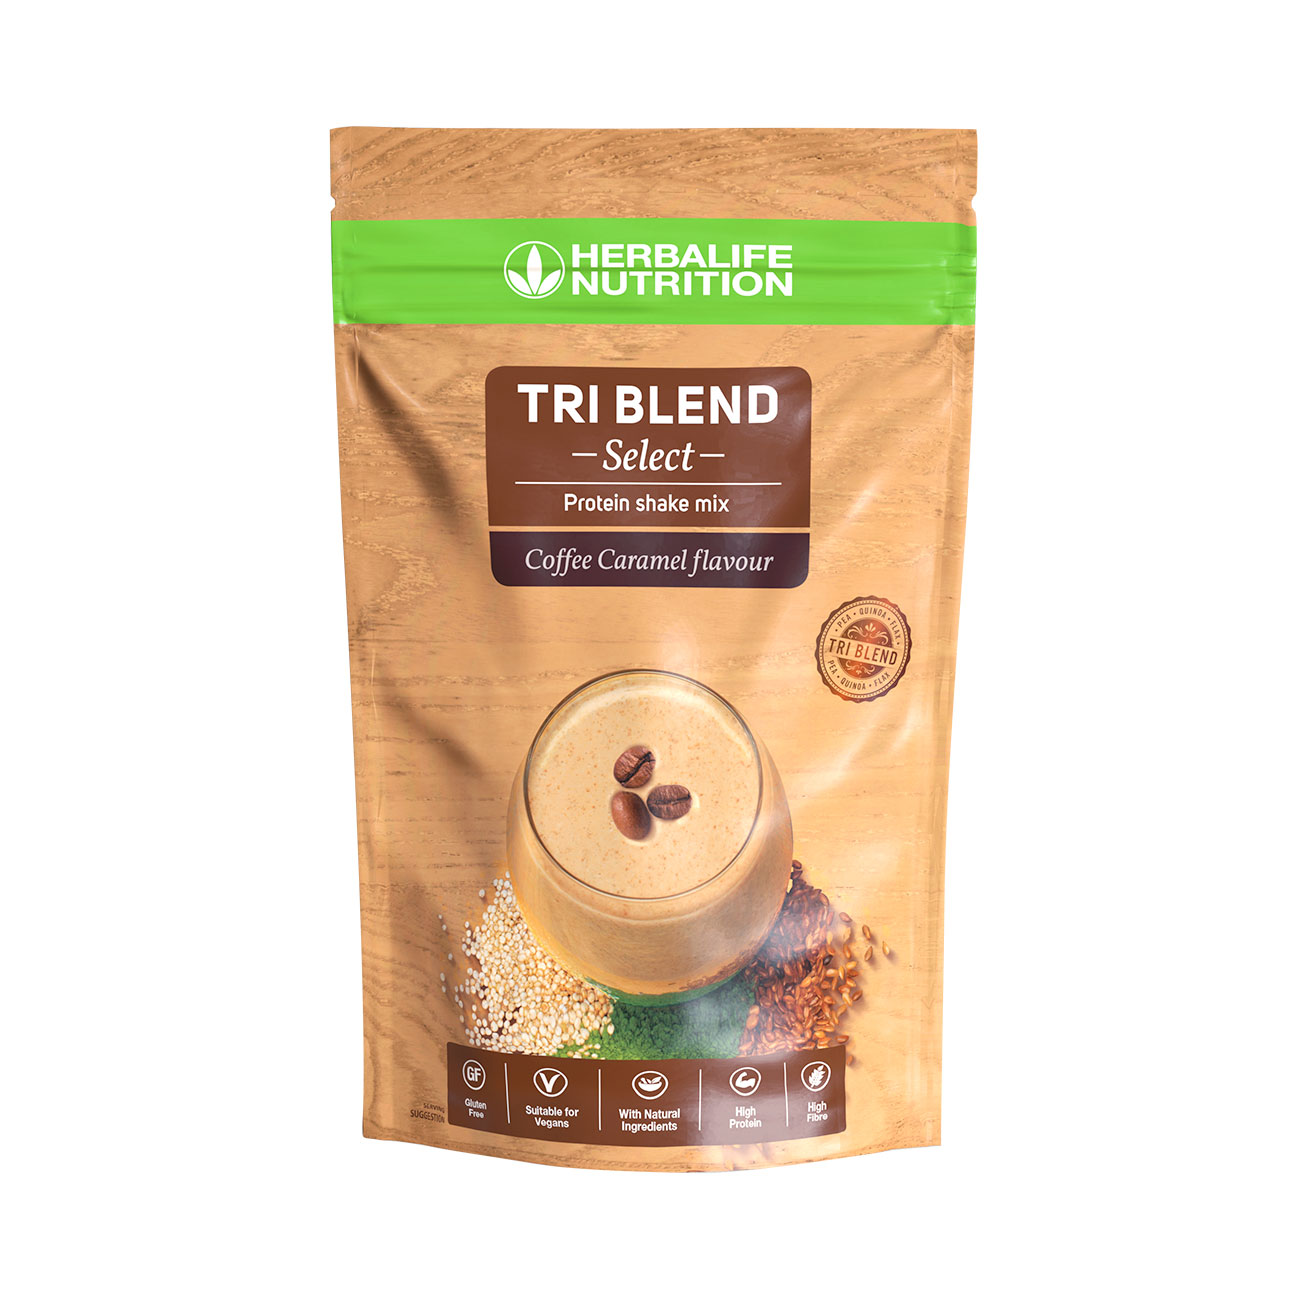 Tri Blend Select Protein Shake Coffee Caramel product shot